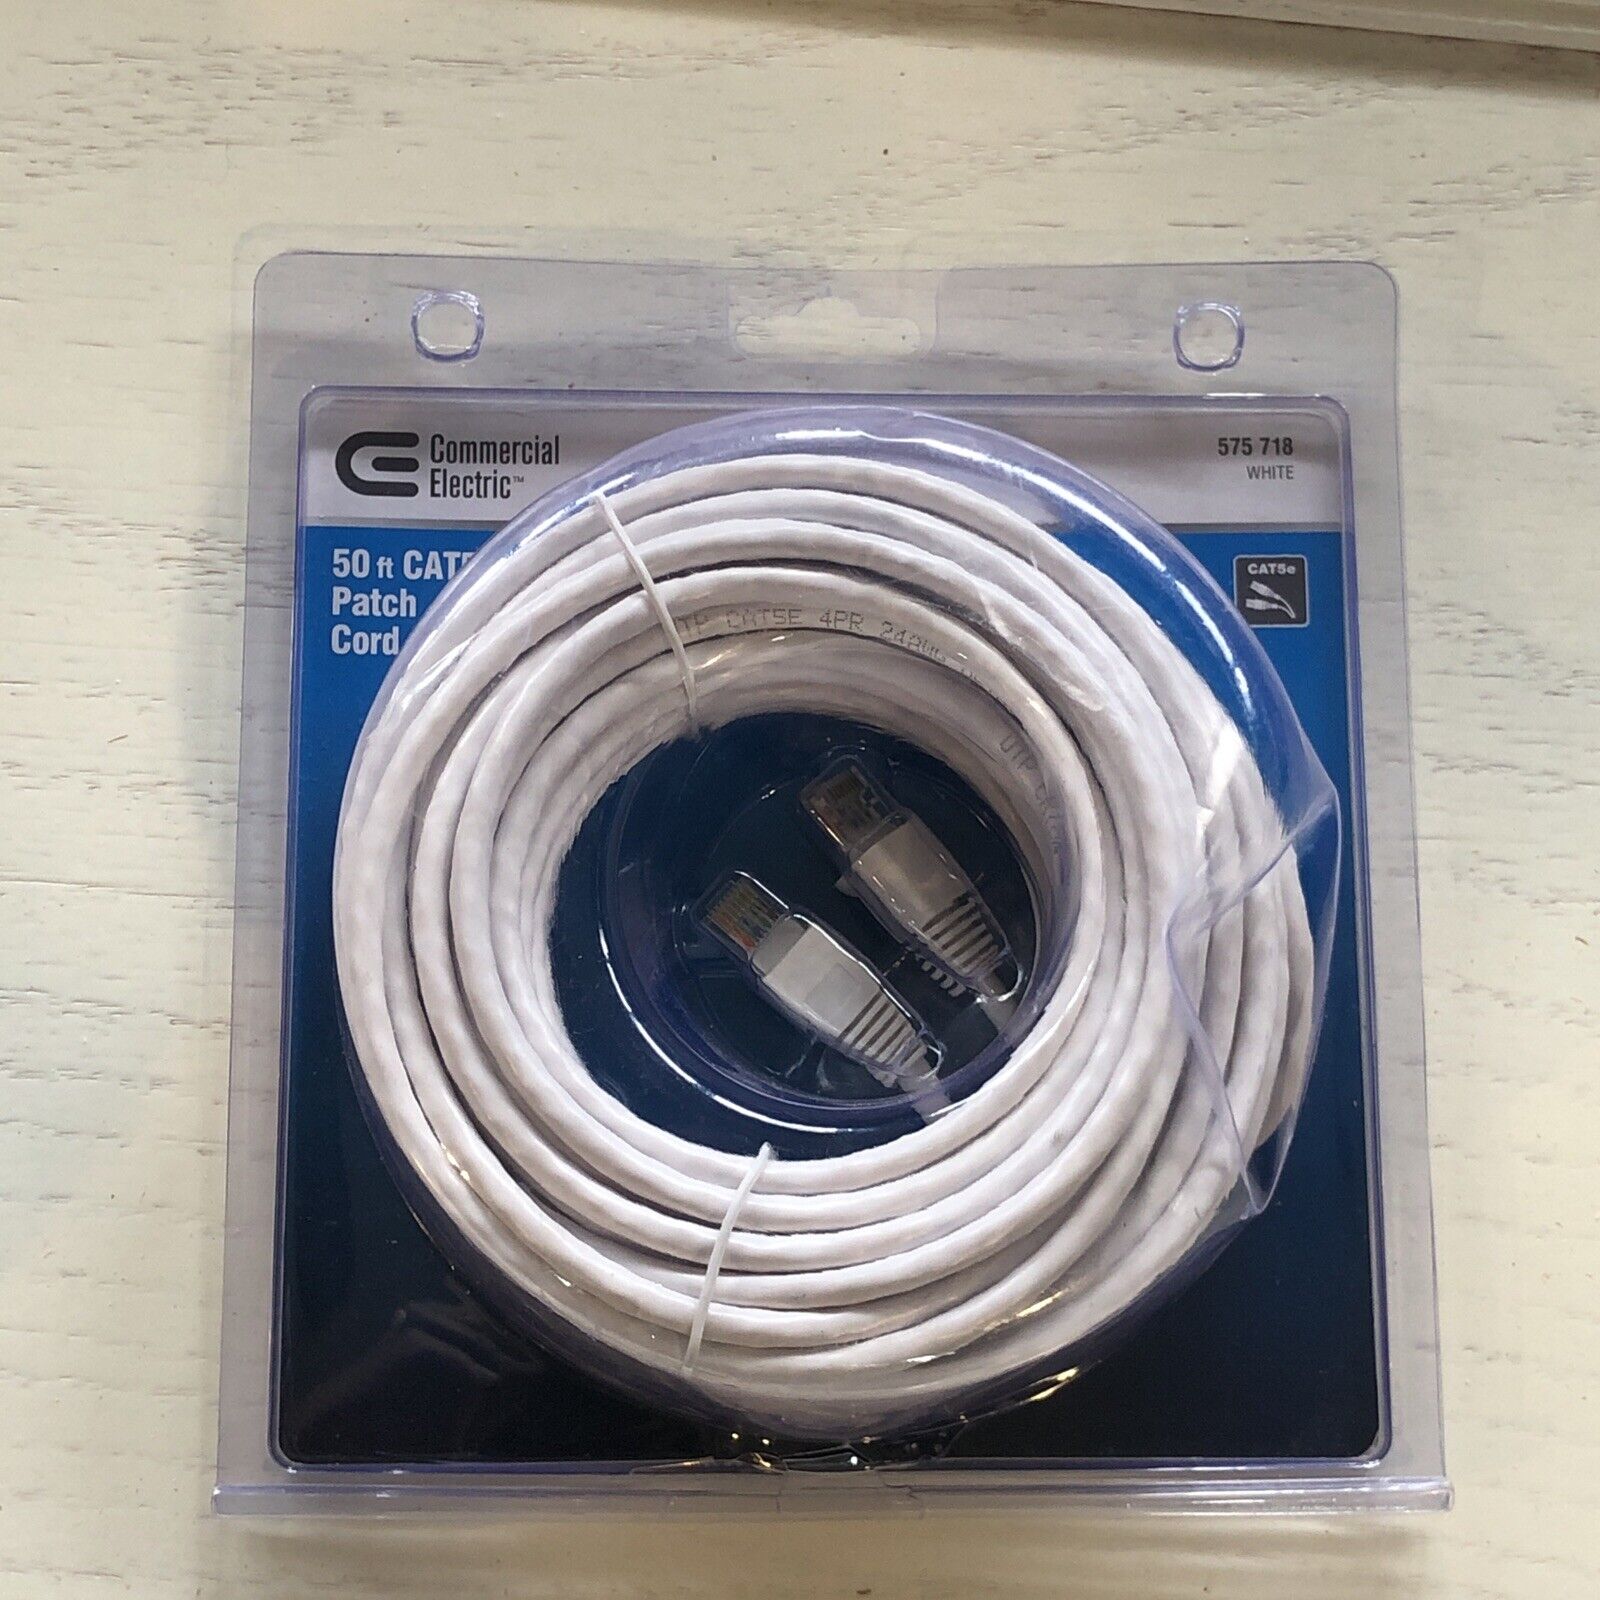 New Commercial Electric 50' Patch Cord Cat5e UTP Ethernet Cable 575718 White